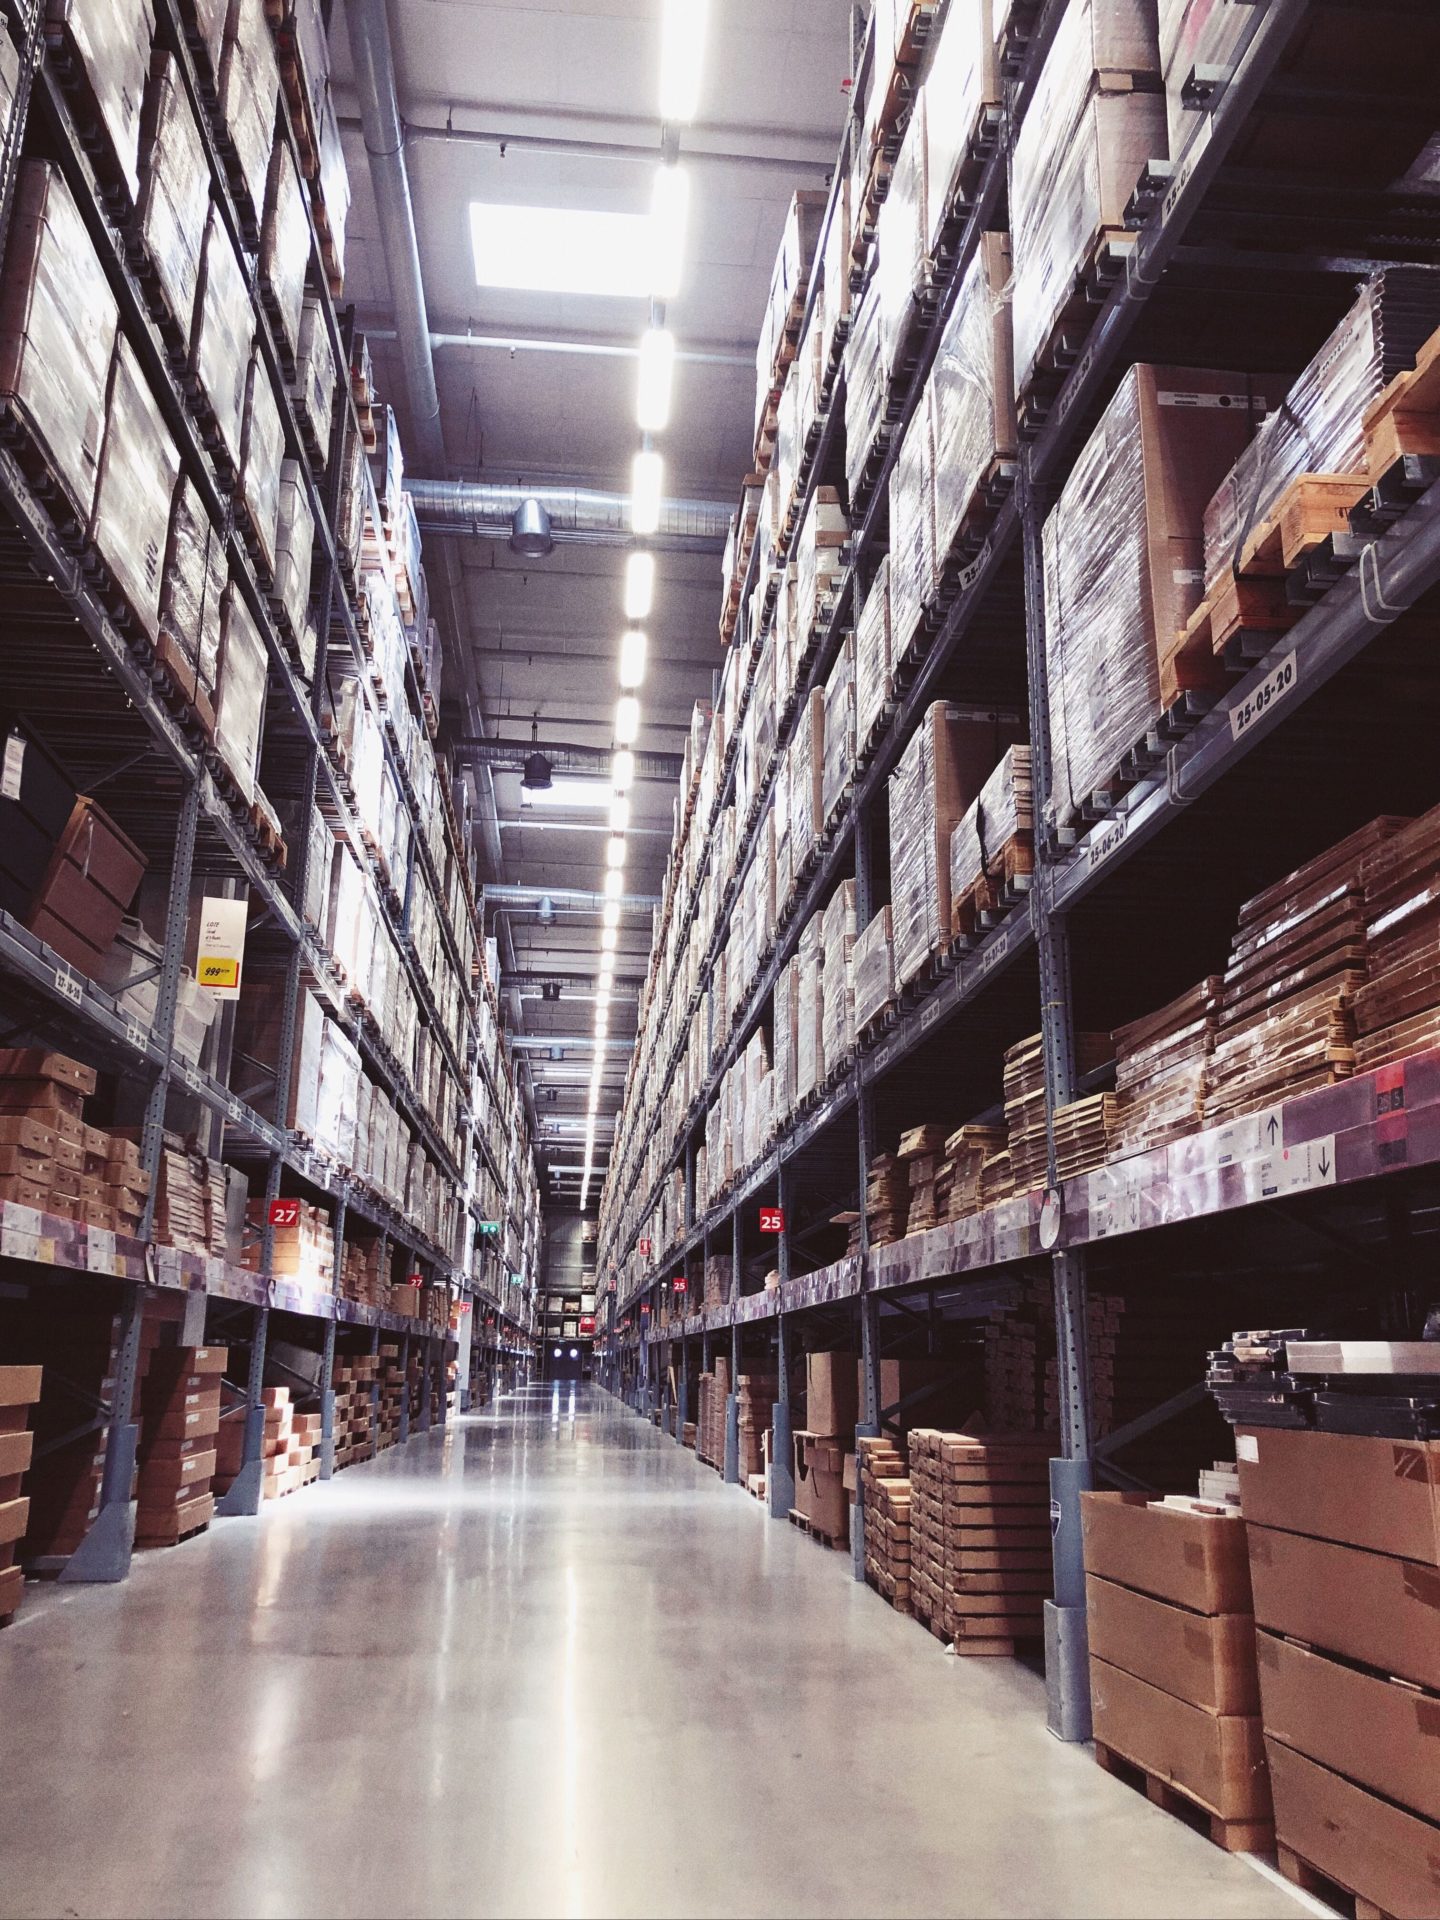 Protect Against Warehouse Hazards with SpillShop